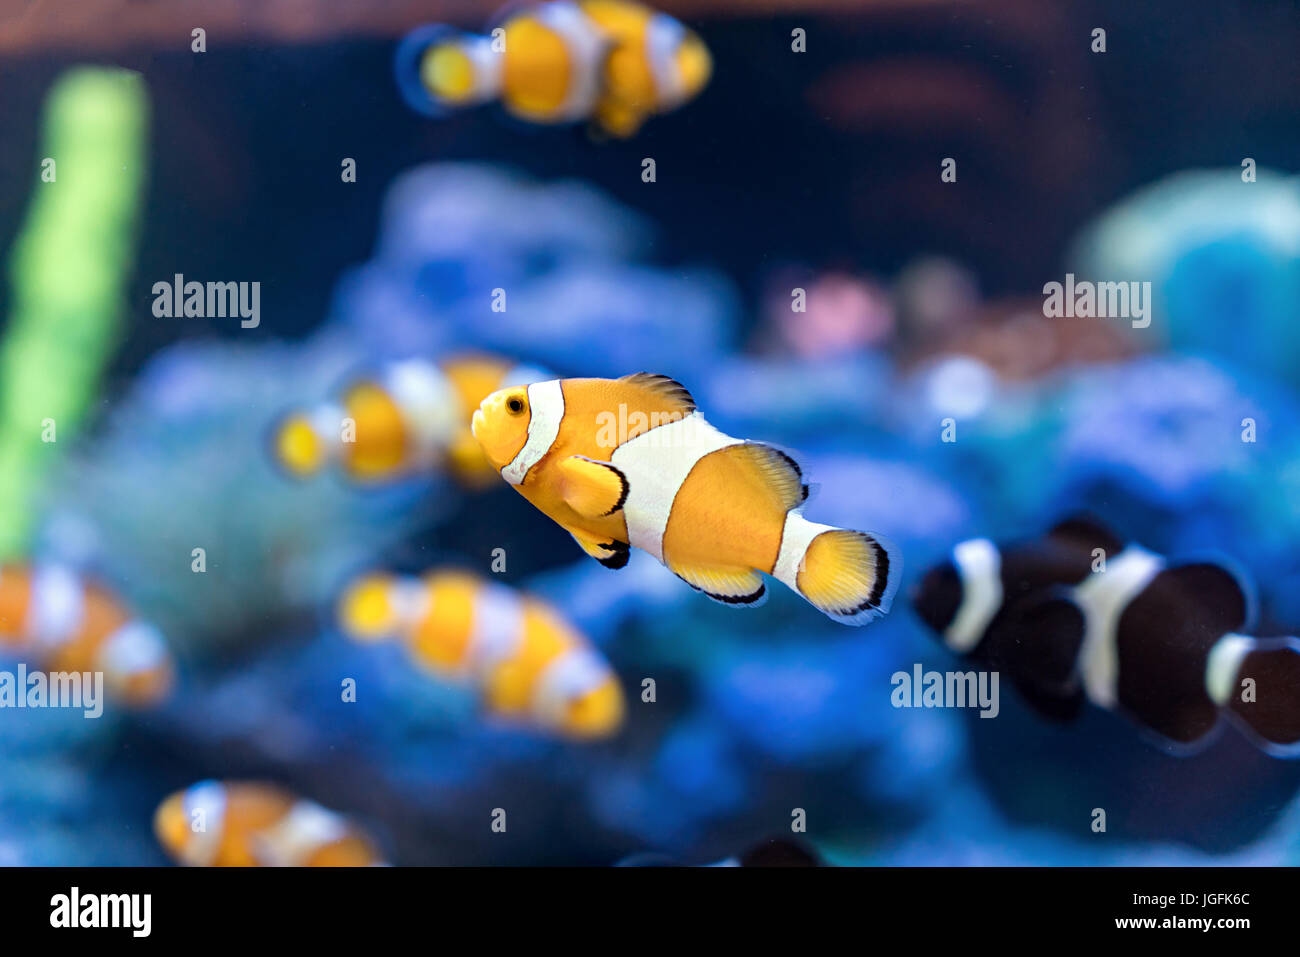 Amphiprion Ocellaris Clownfish In Clownfish swim around their host anemone with blue water behind. Photo of a tropical Fish on a coral reef. Stock Photo